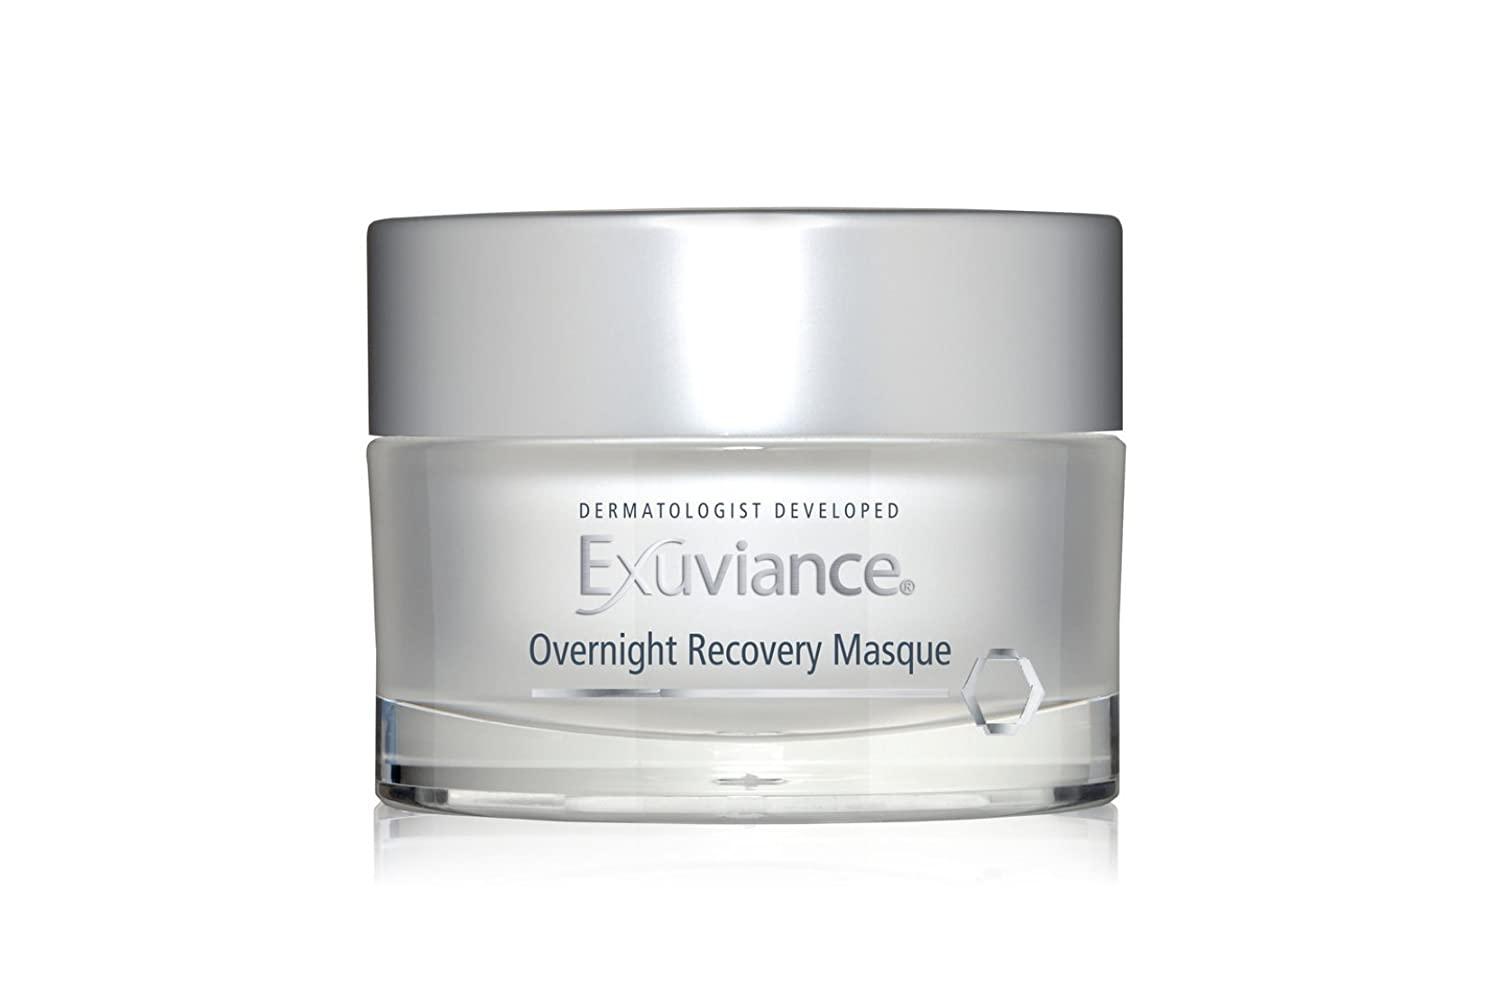 Overnight Recovery Masque